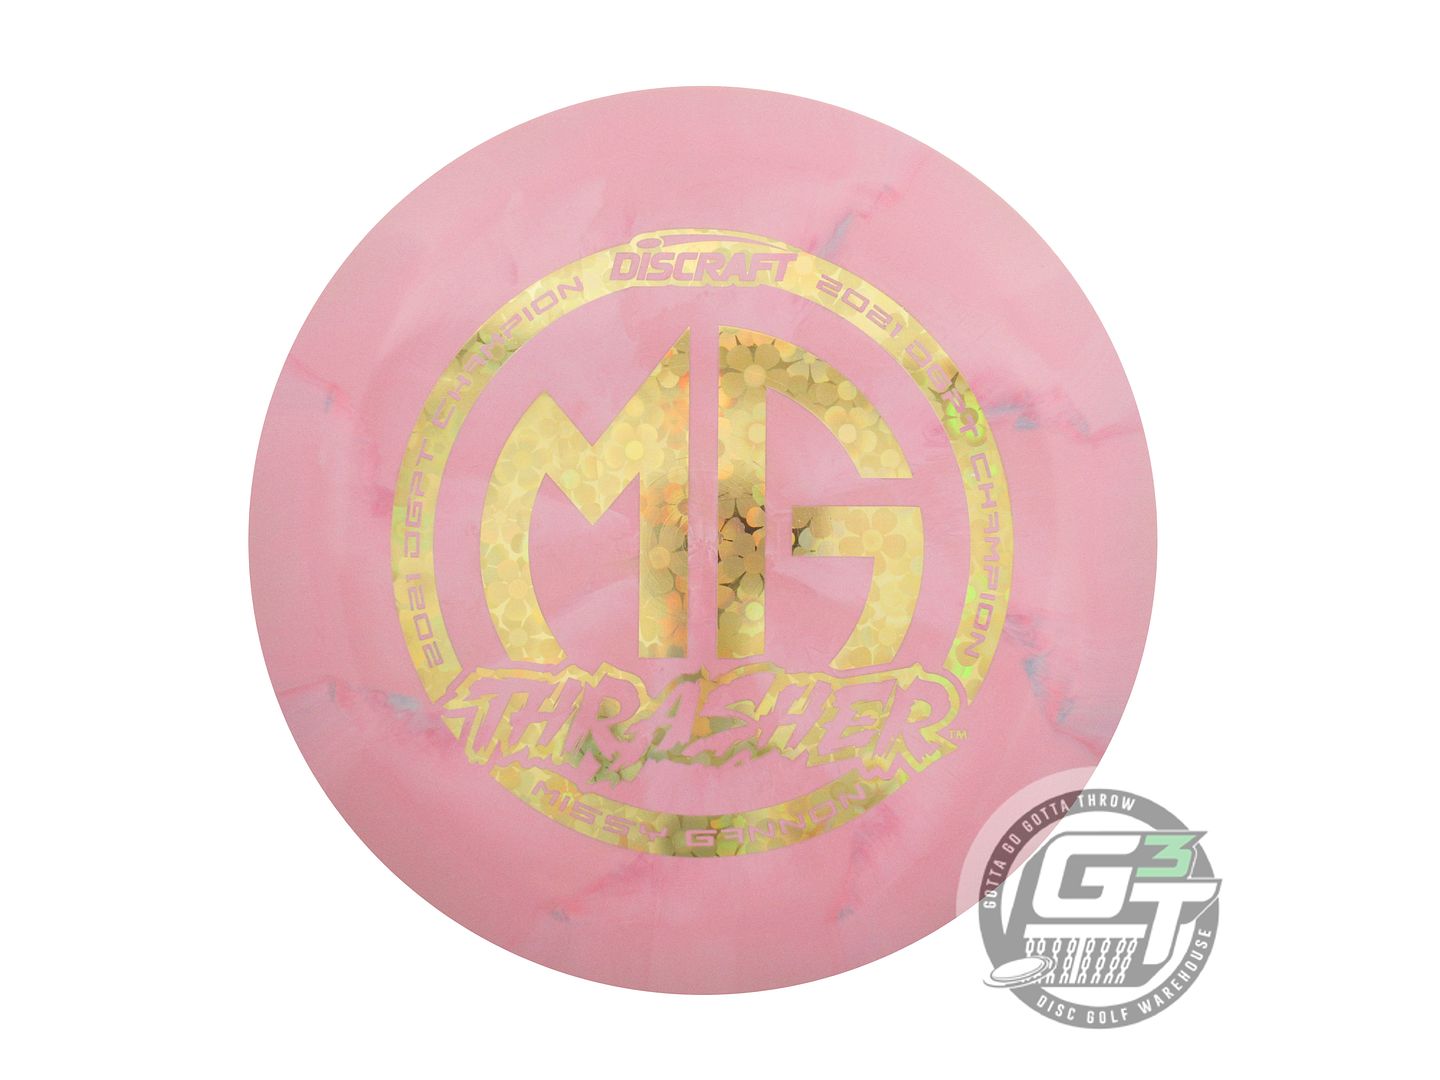 Discraft Limited Edition 2021 Tour Series Missy Gannon Swirly ESP Thrasher Distance Driver Golf Disc (Individually Listed)